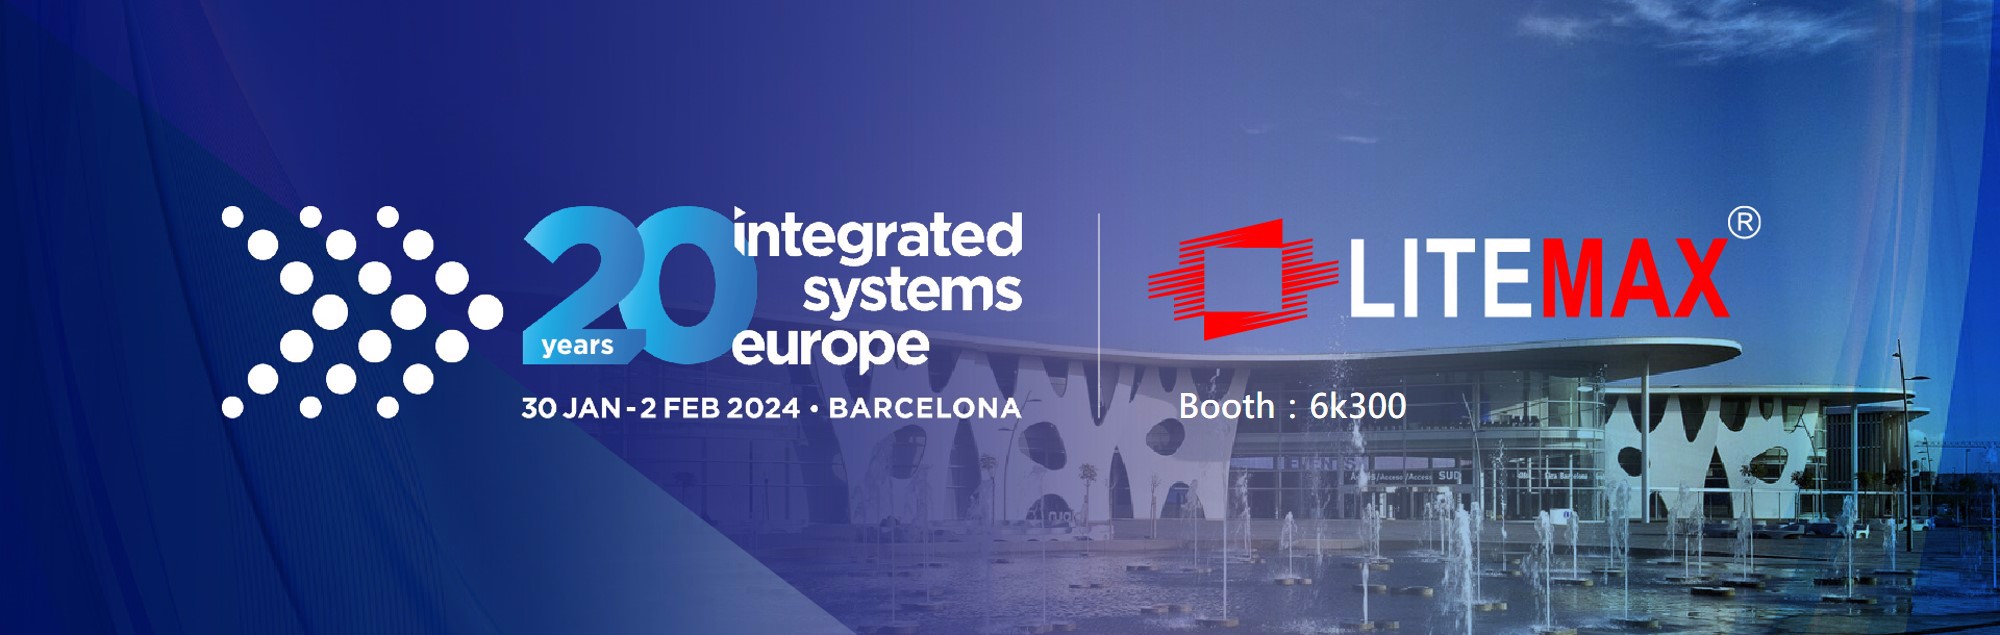 LITEMAX Collaborates with Steliau Iberia and Assured Systems in ISE 2024, Showcasing the Latest Industrial Display Solutions